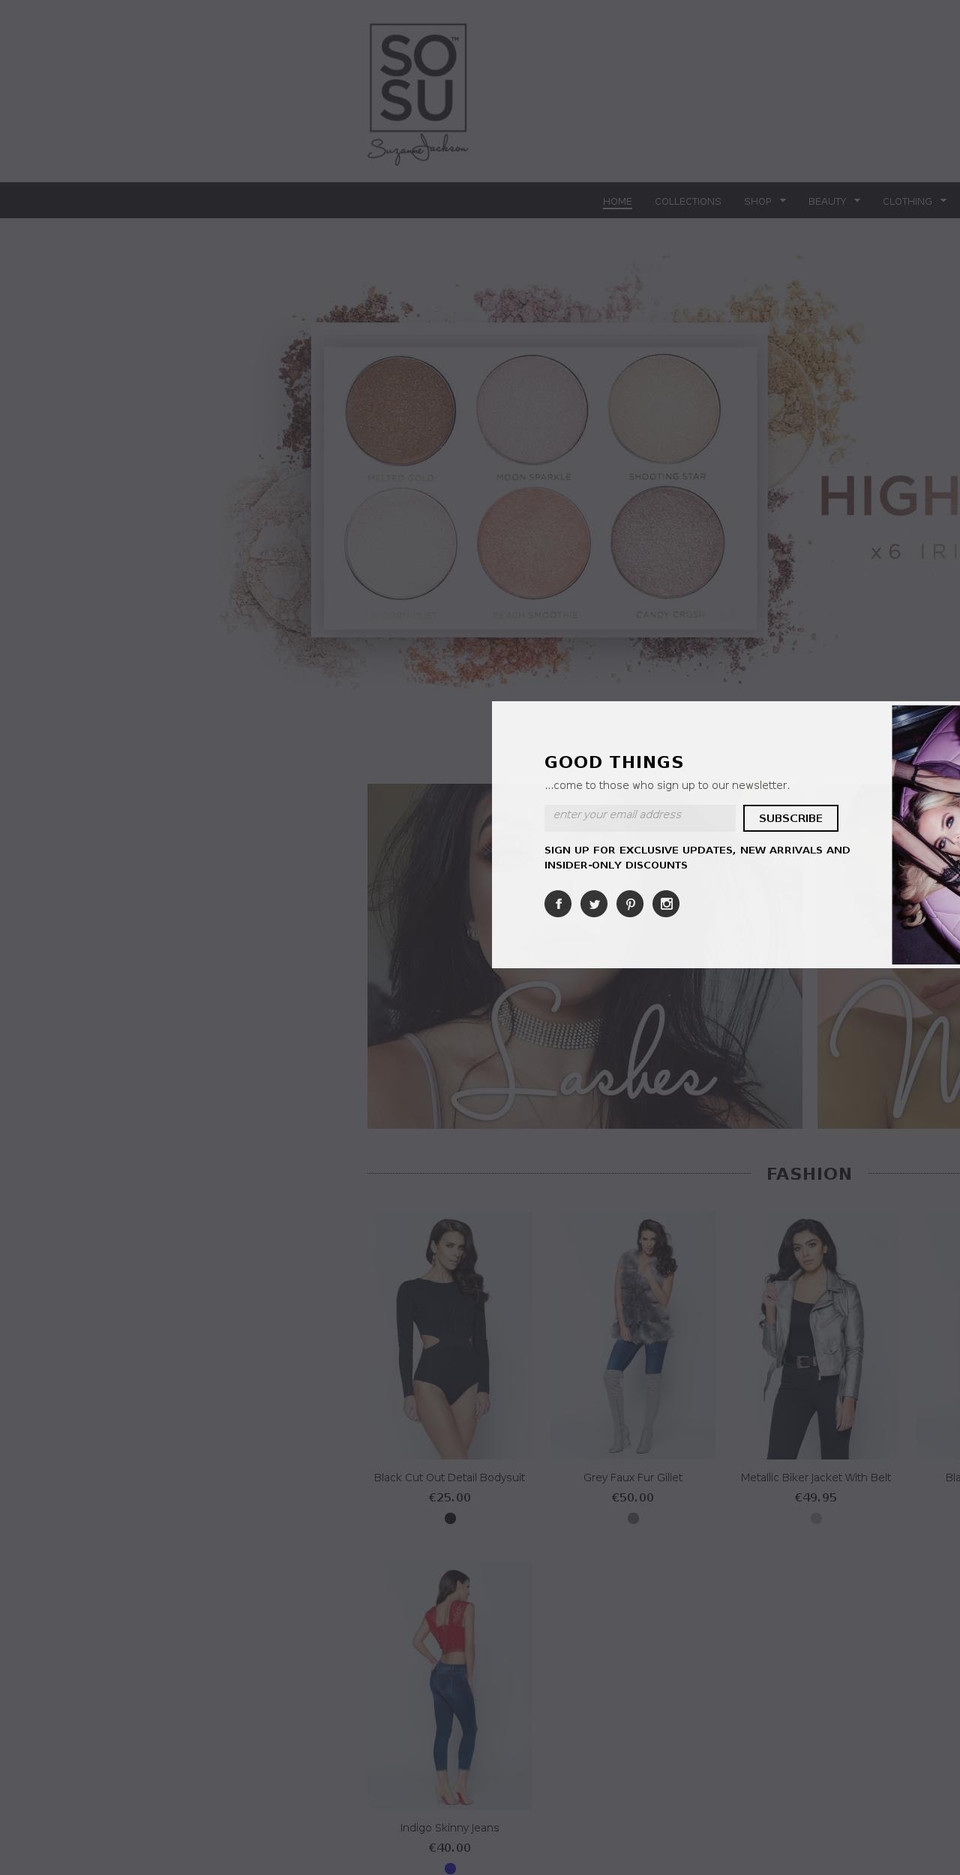 Live Shopify theme site example sosu.ie